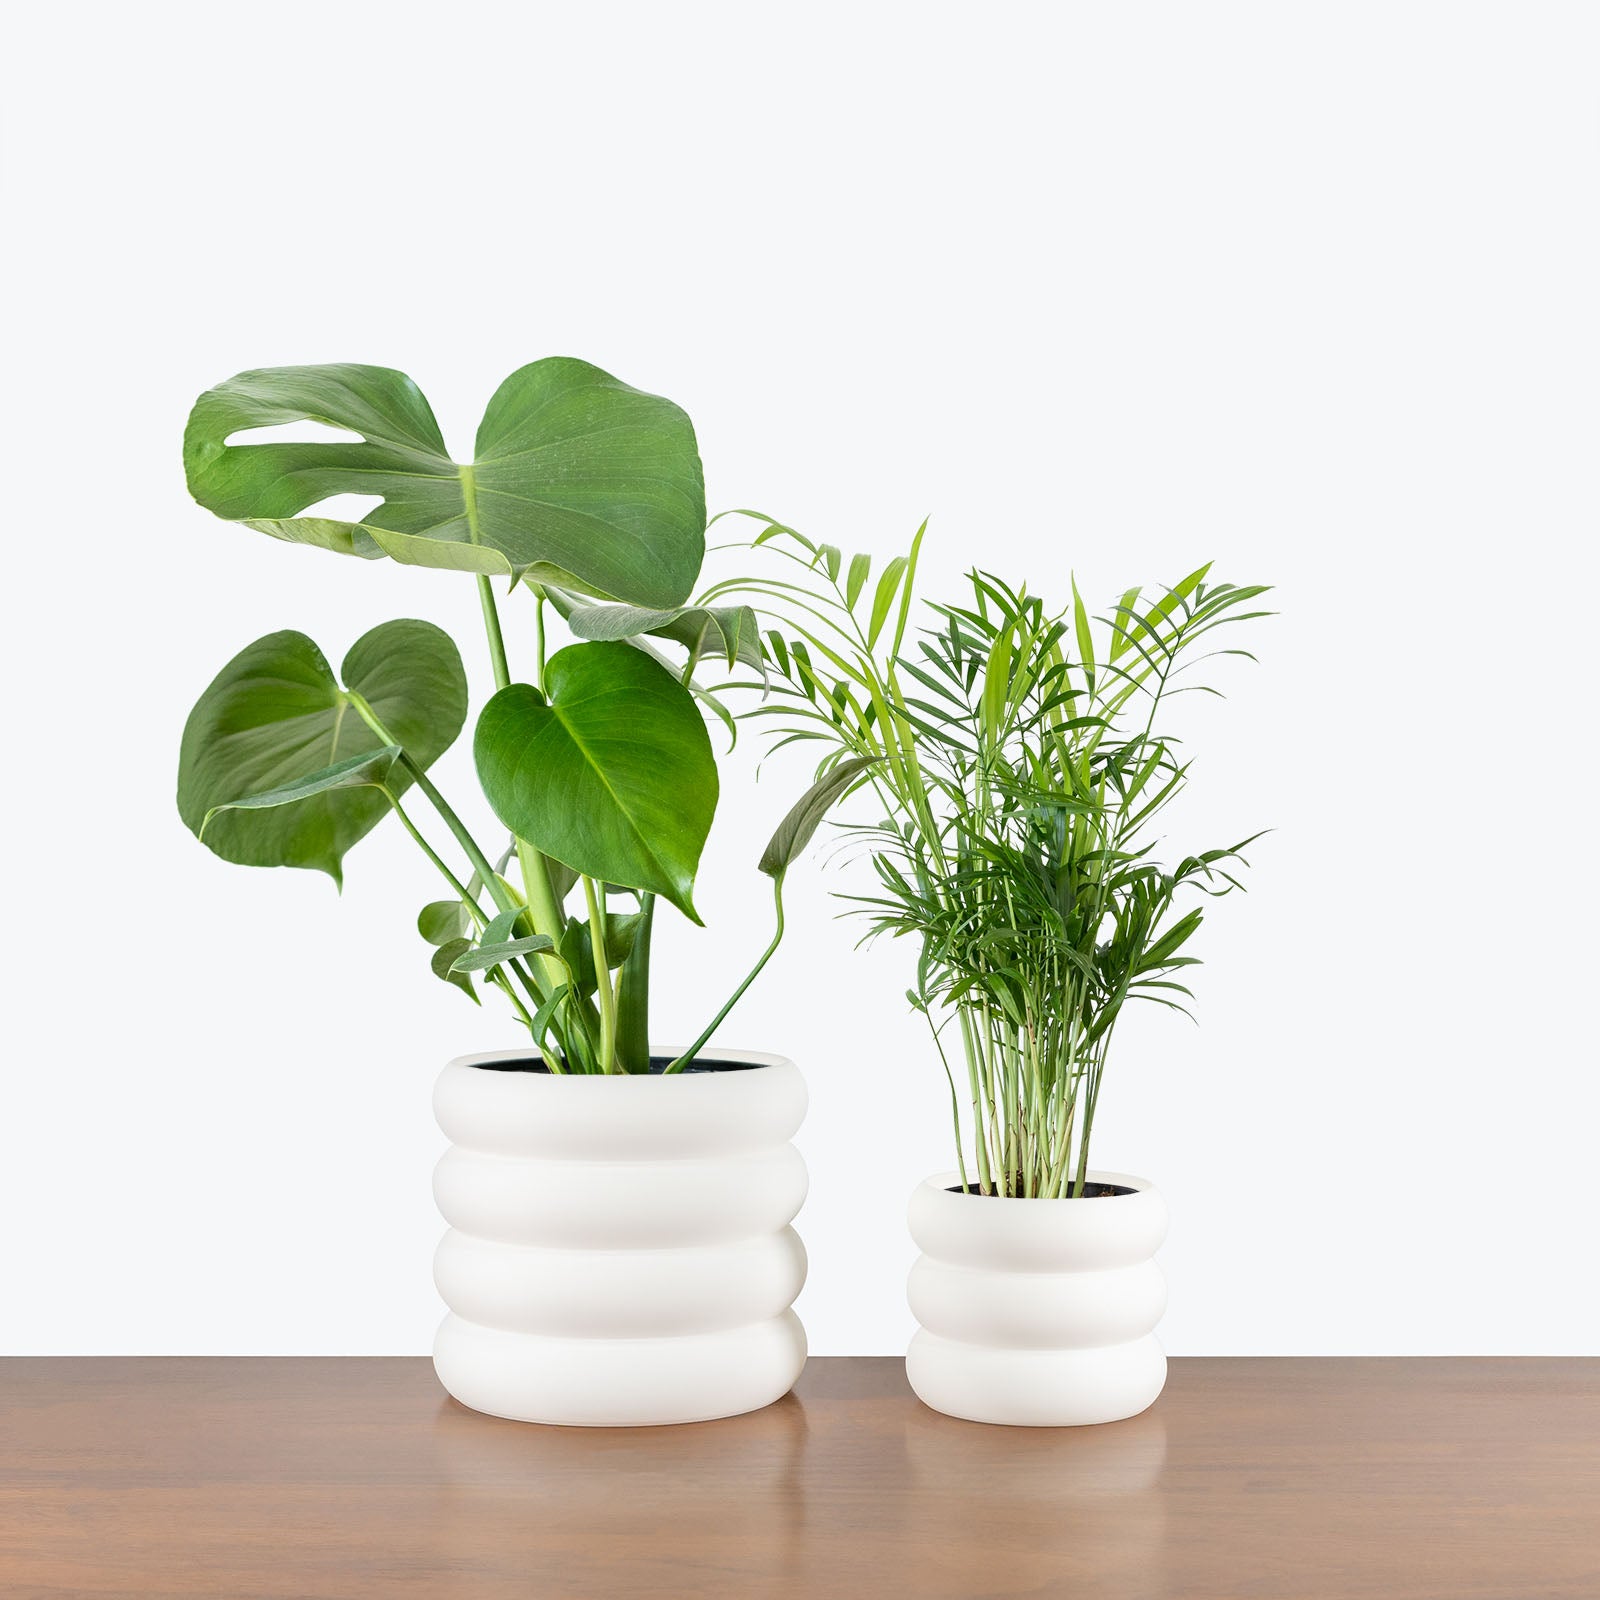 Best Selling Duo in 3D Printed Eco Friendly Donut White Planter - House Plants Delivery Toronto - JOMO Studio #planter_donut planter